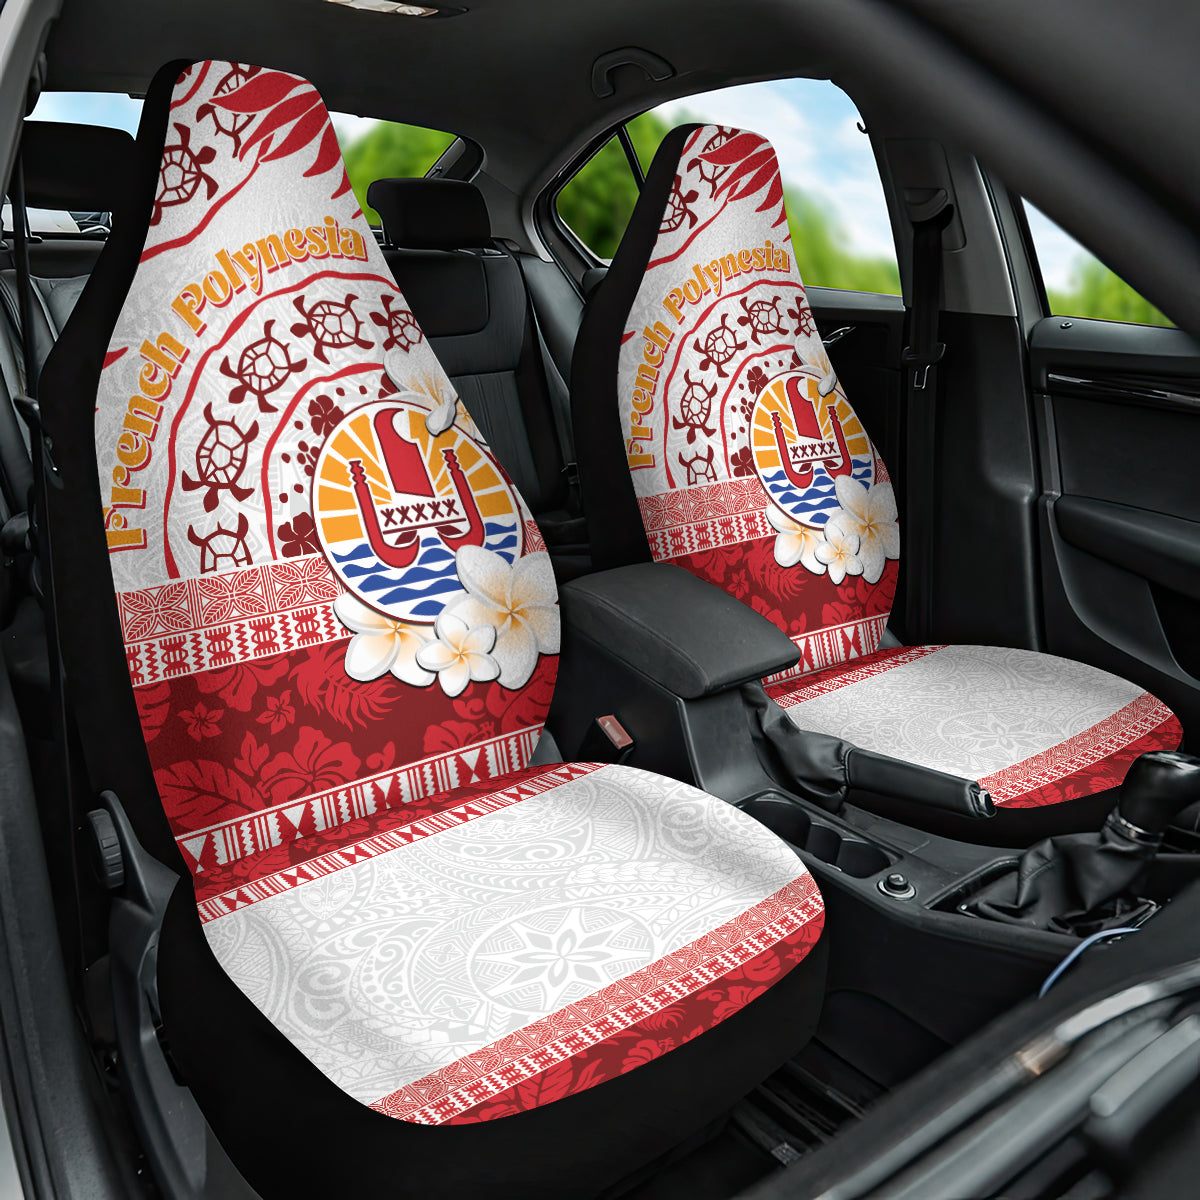 French Polynesia Internal Autonomy Day Car Seat Cover Tropical Hibiscus And Turtle Pattern